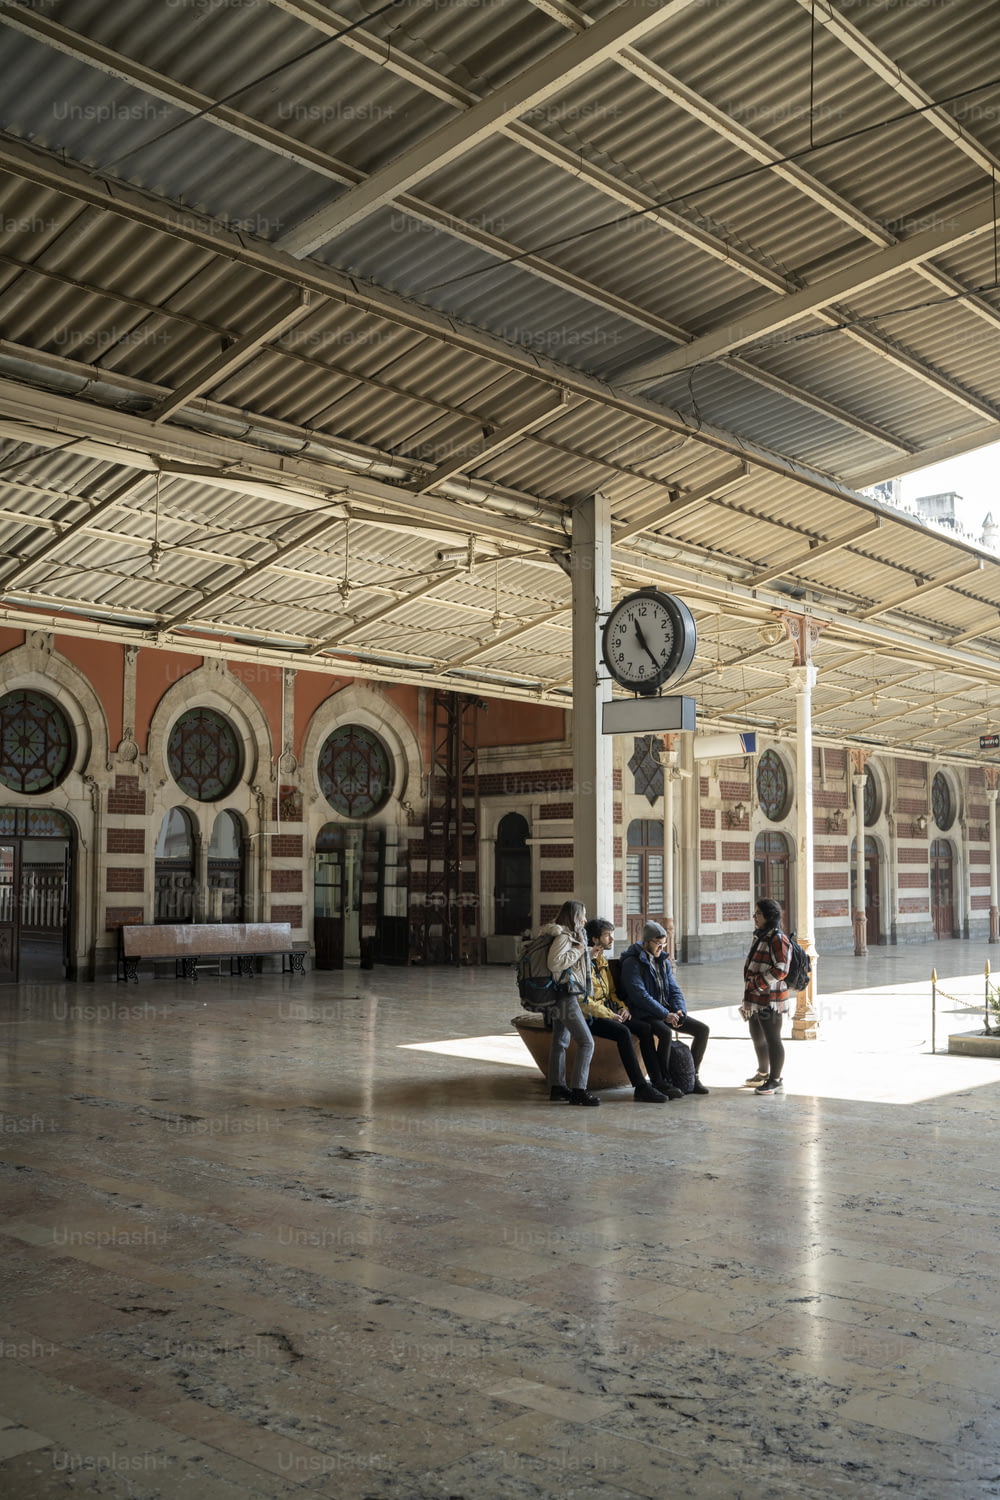 a group of people sitting on a bench in a train station